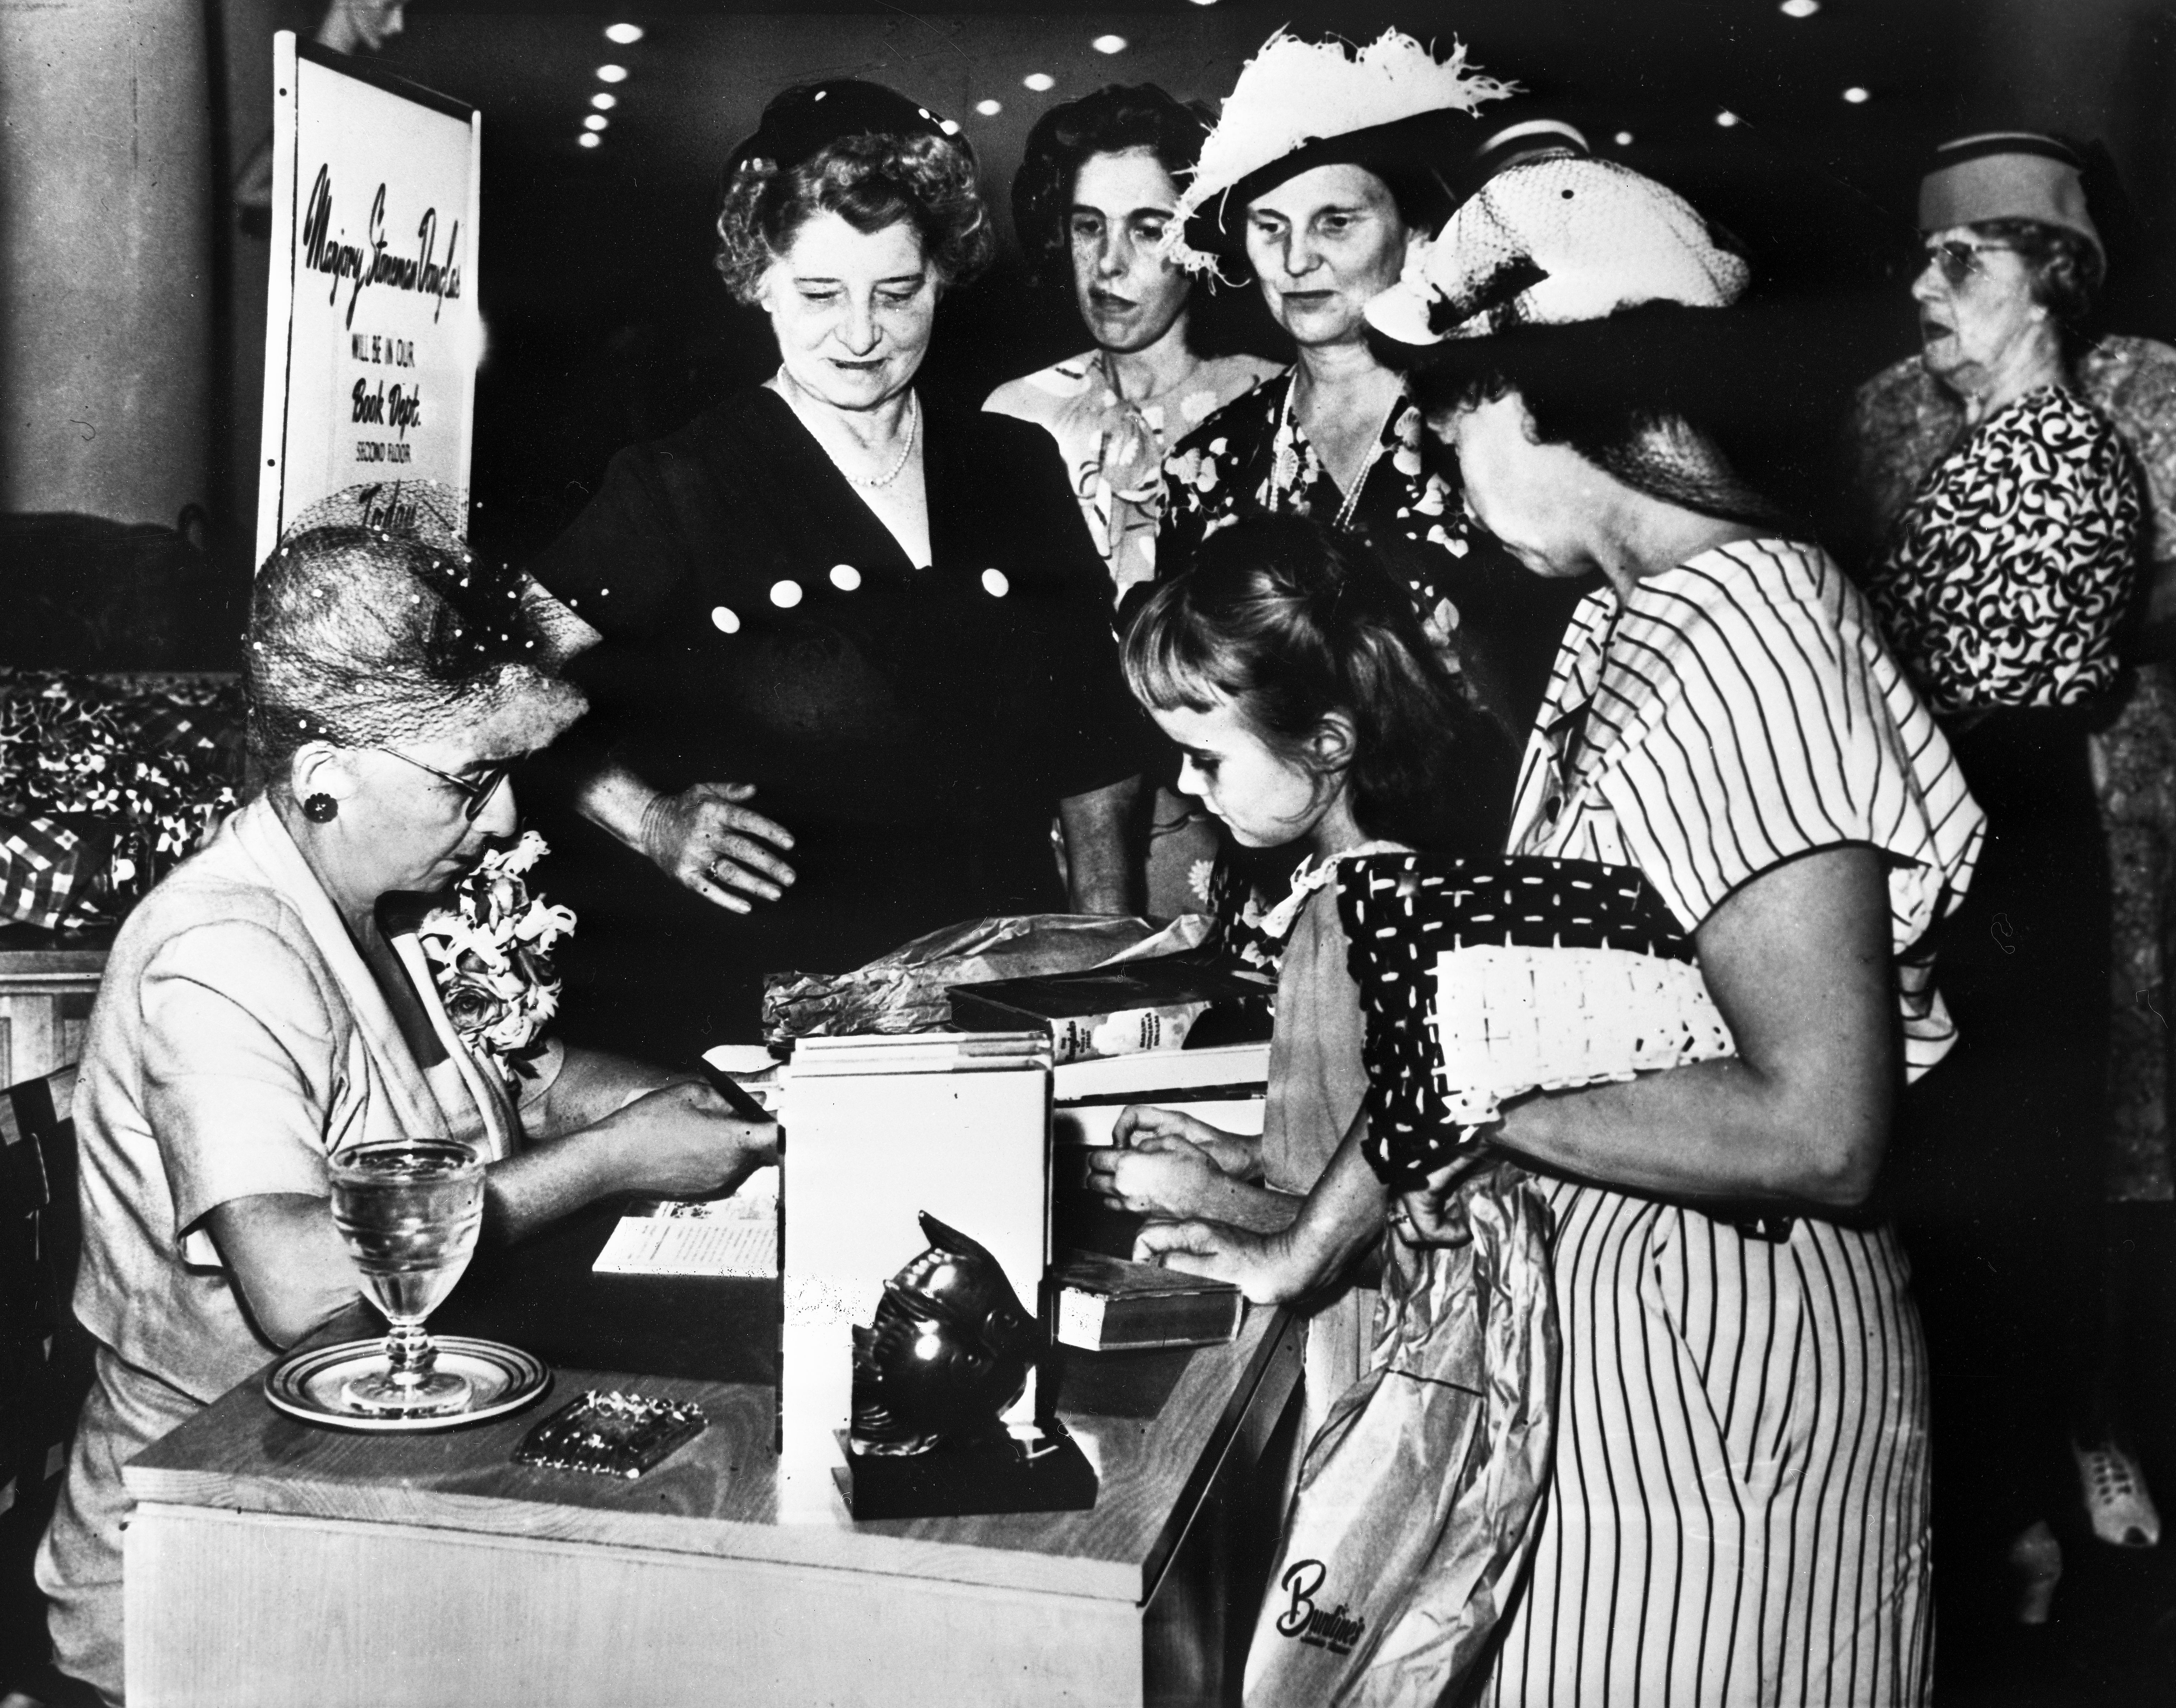 Marjory signs copies of River of Grass in a Burdines Department Store, 1947.